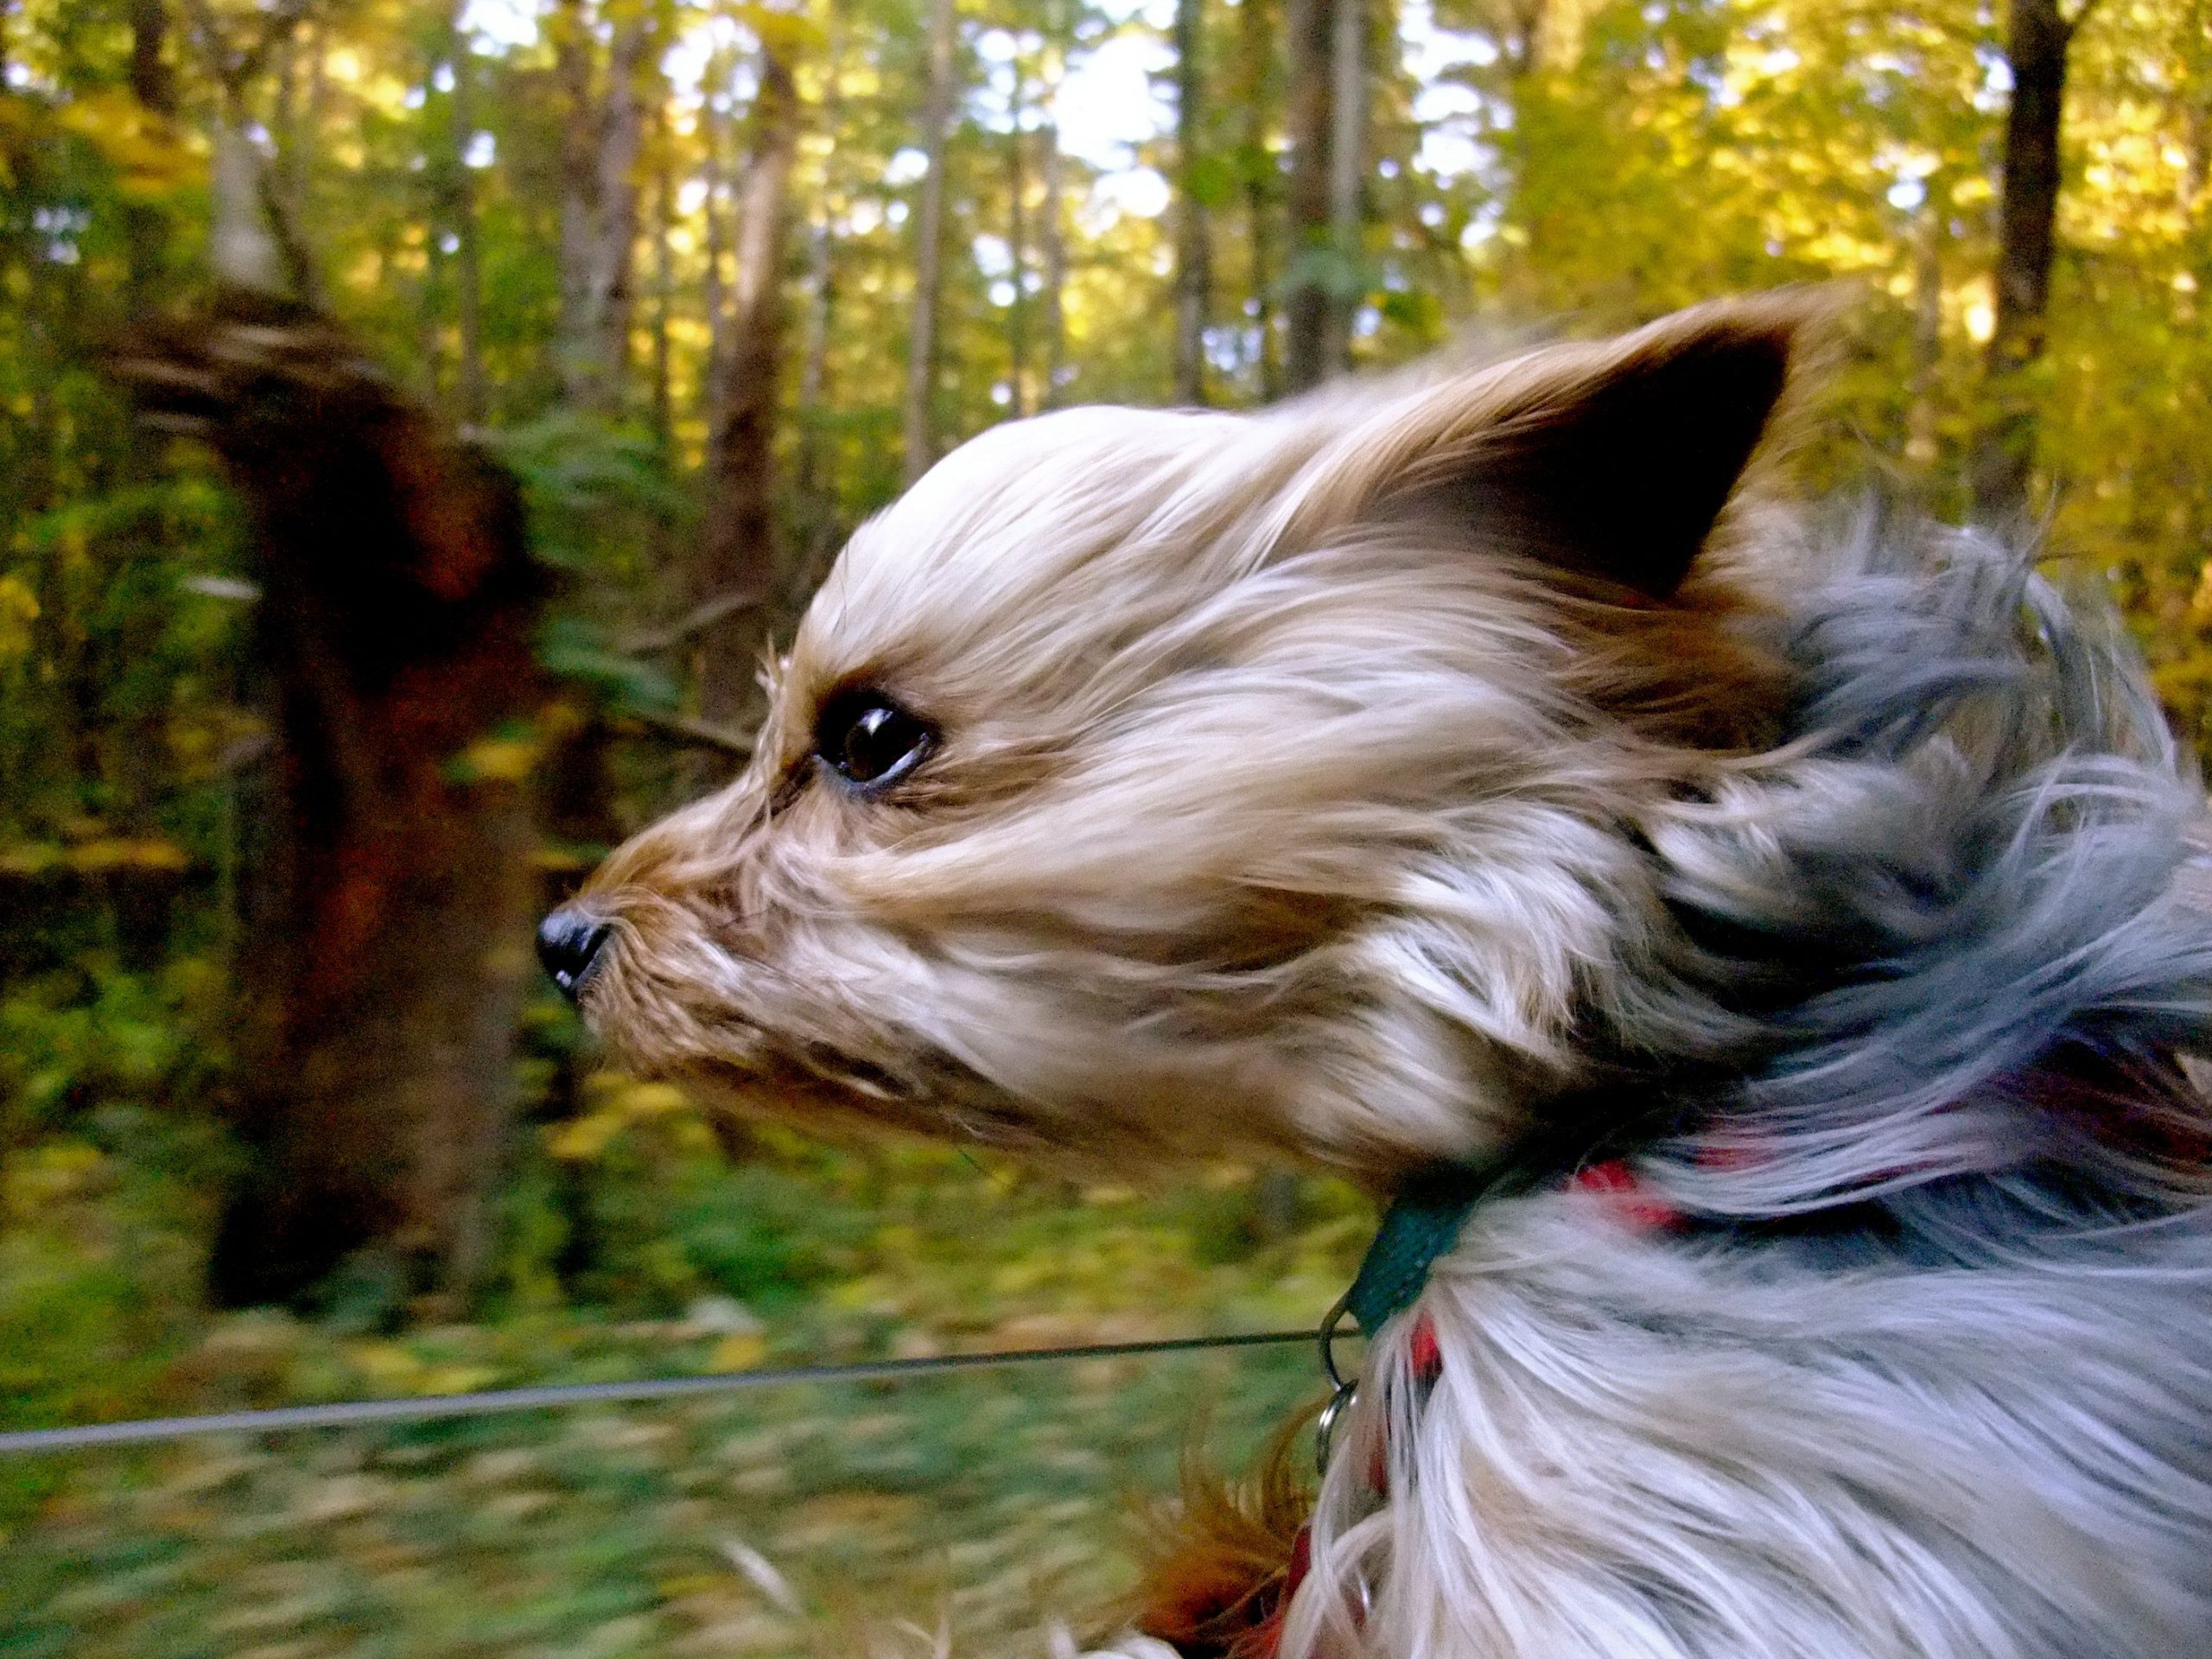 Dog In The Wind (user submitted)